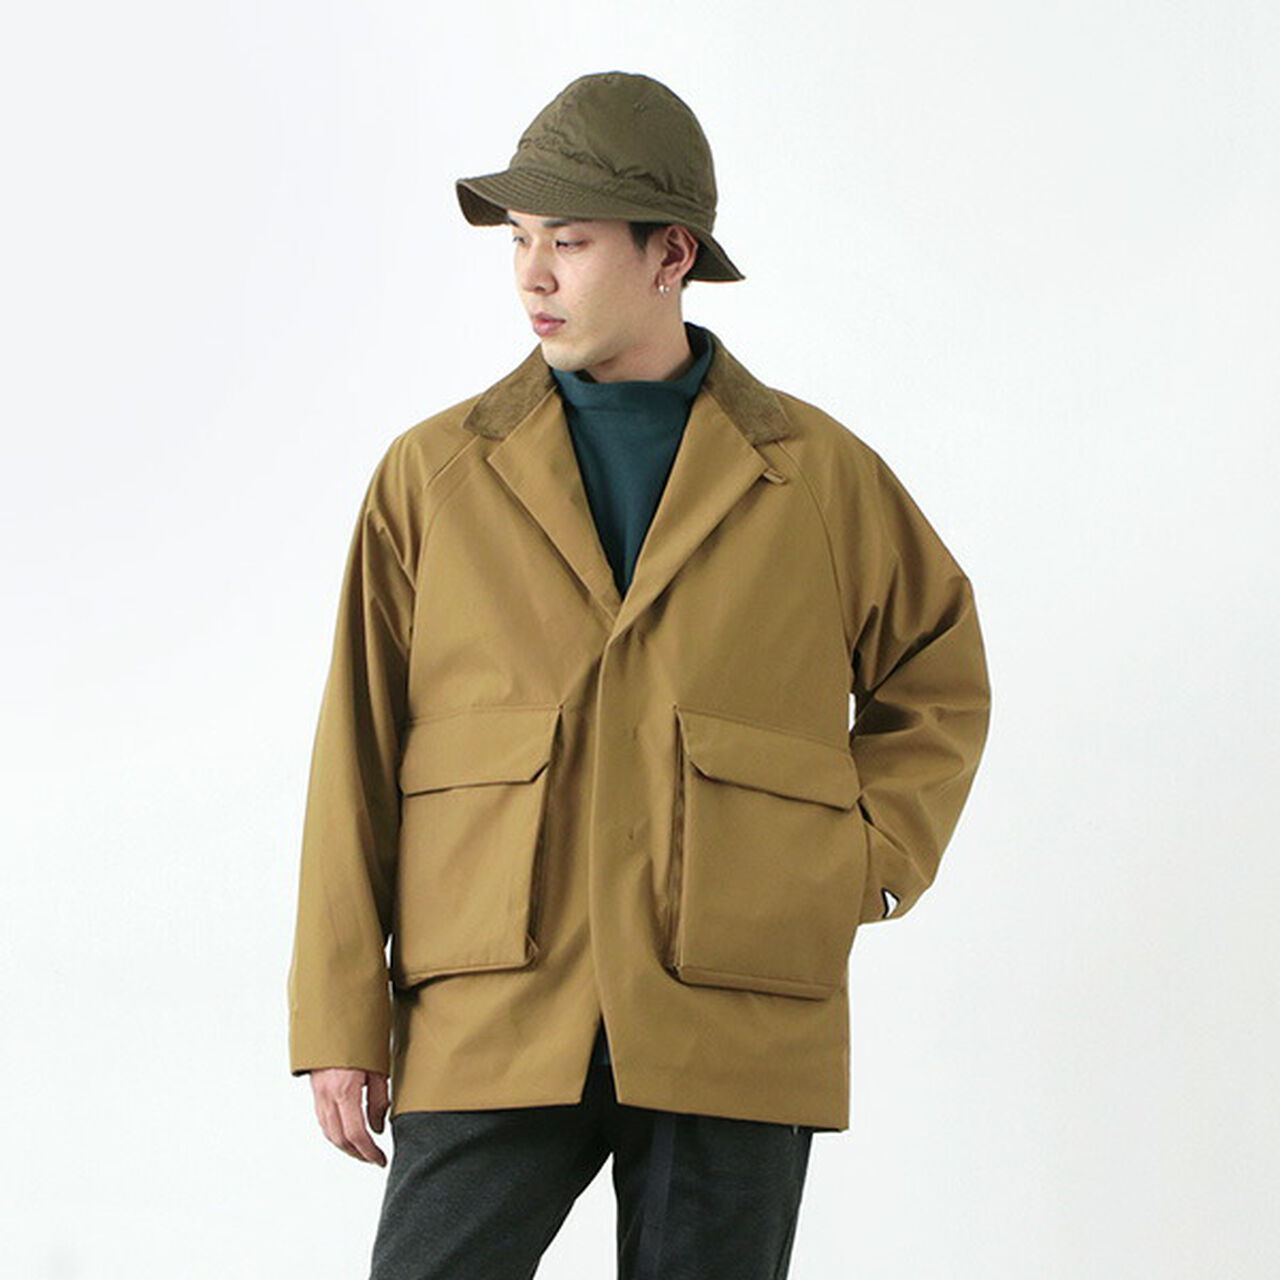 Recycled Nylon ROBIC 3 Layer Jacket,Beige, large image number 0